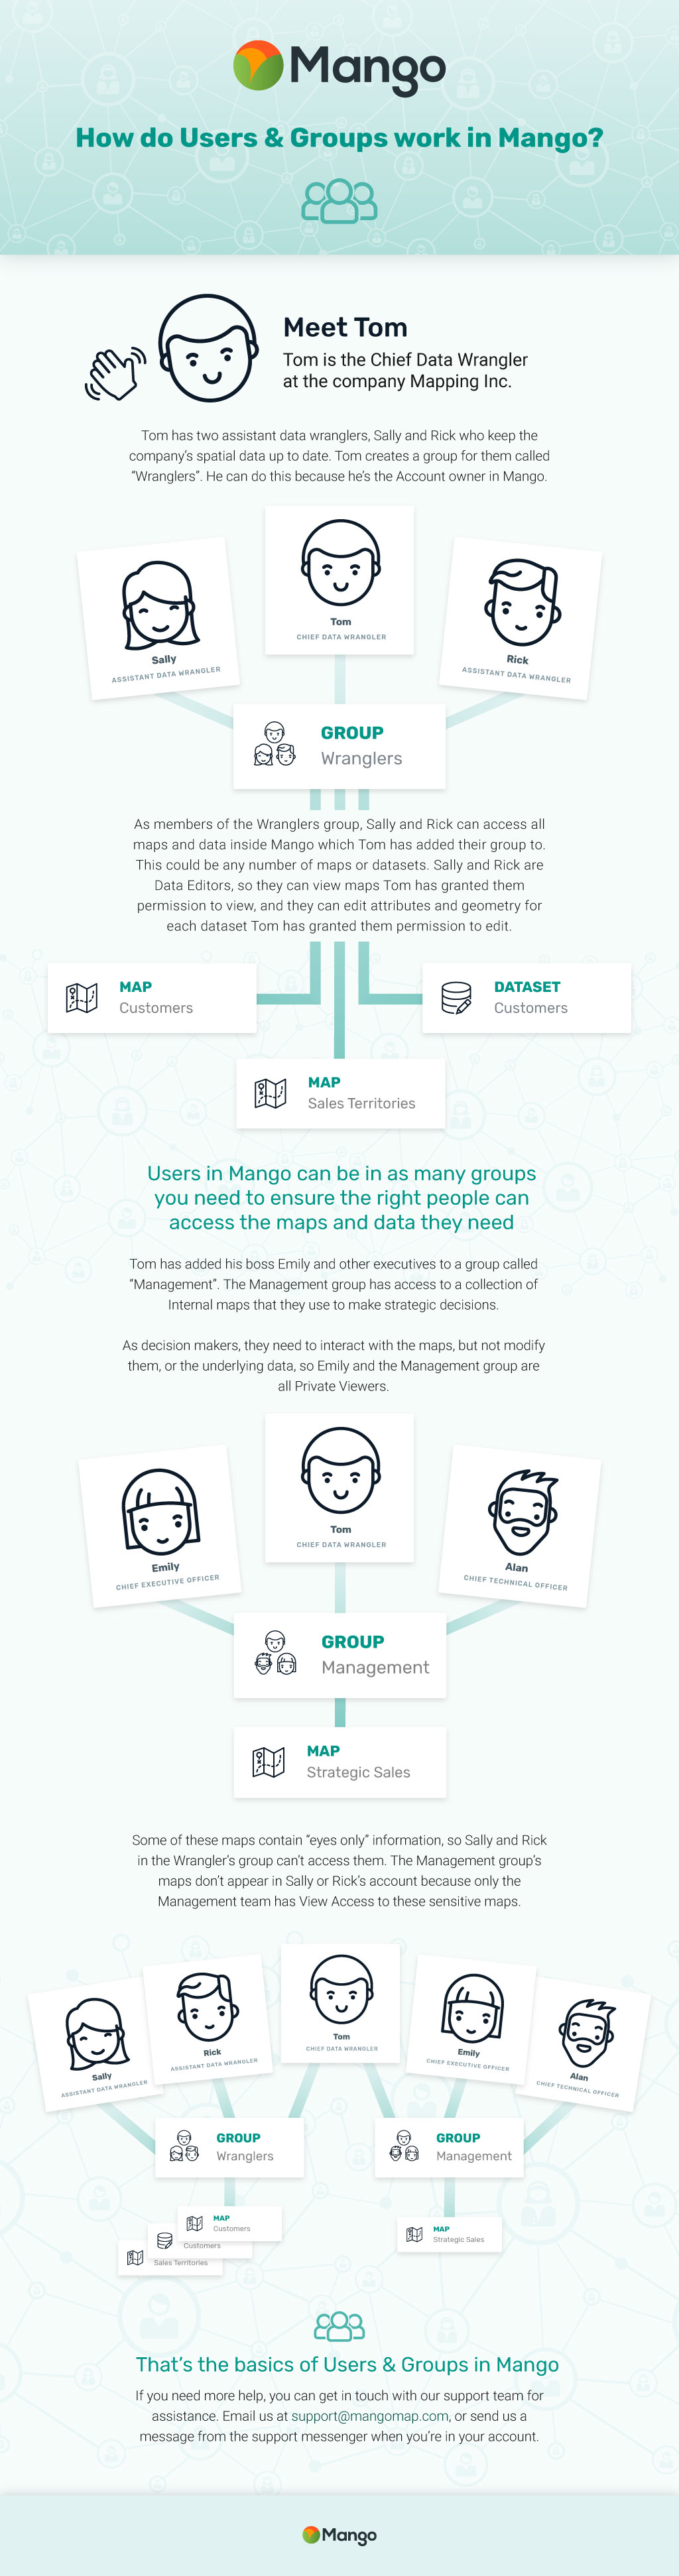 groups-infographic_download.jpg